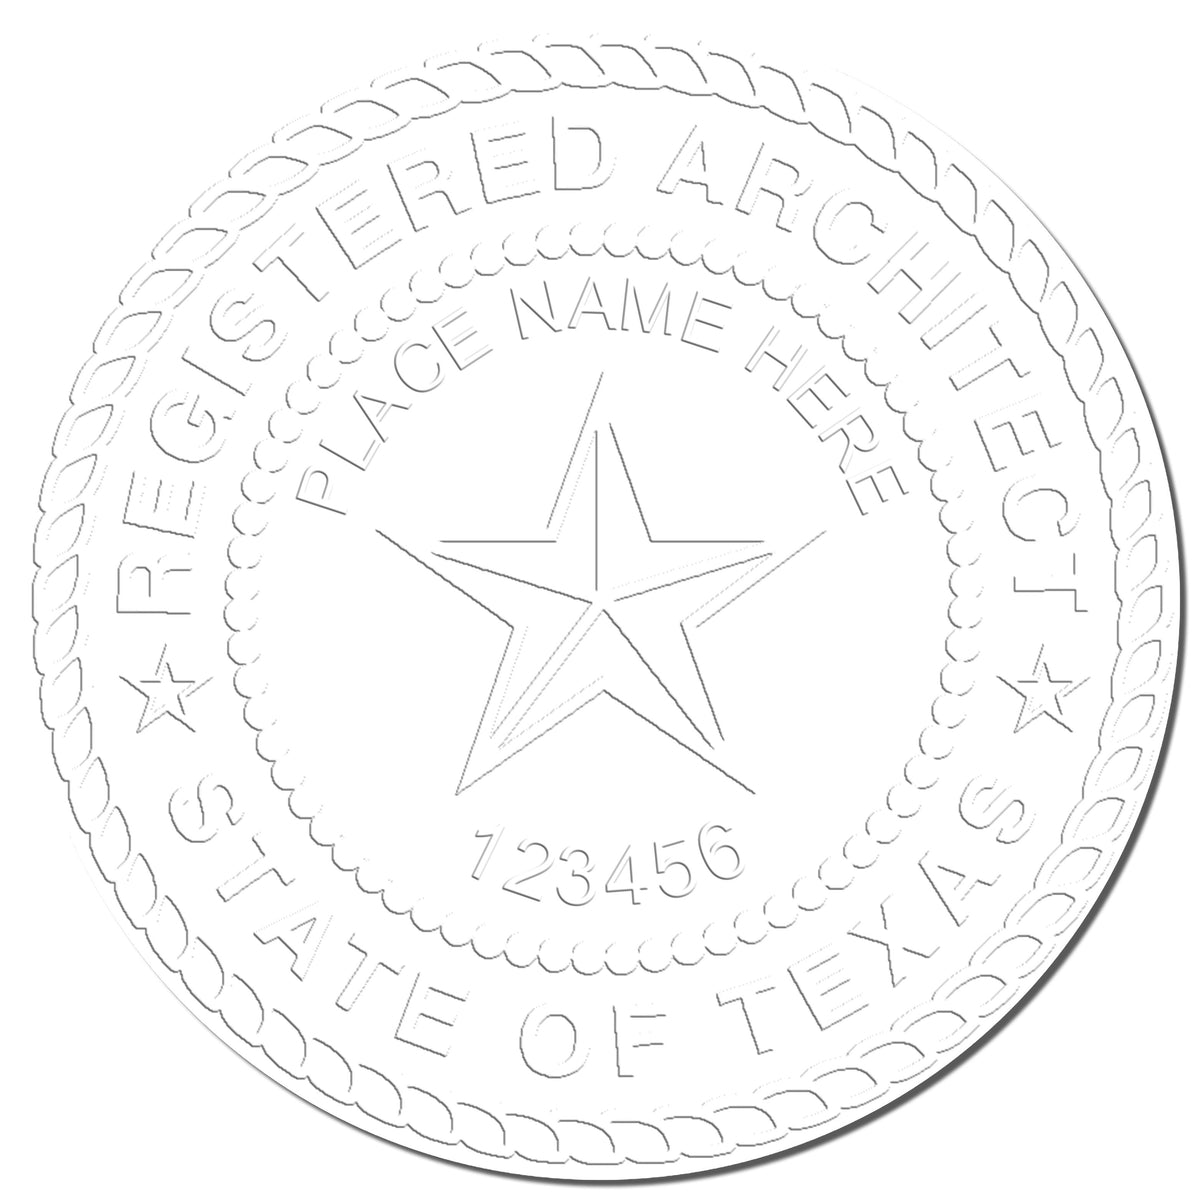 This paper is stamped with a sample imprint of the State of Texas Architectural Seal Embosser, signifying its quality and reliability.